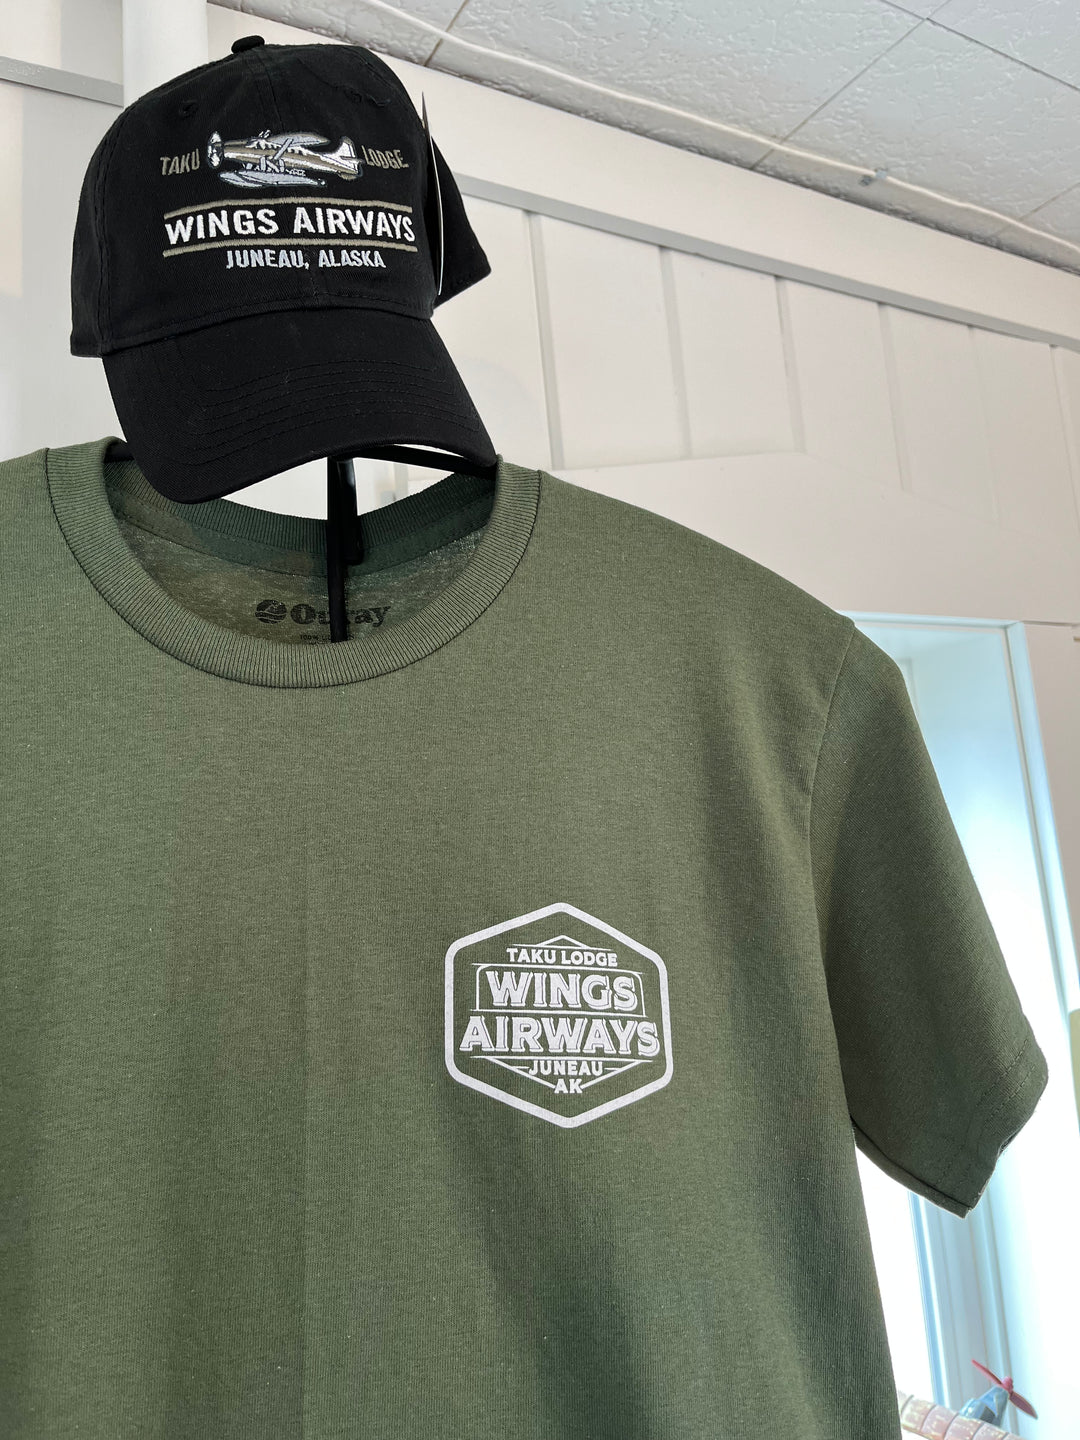 Wings Airways Hat/T-Shirt Combo